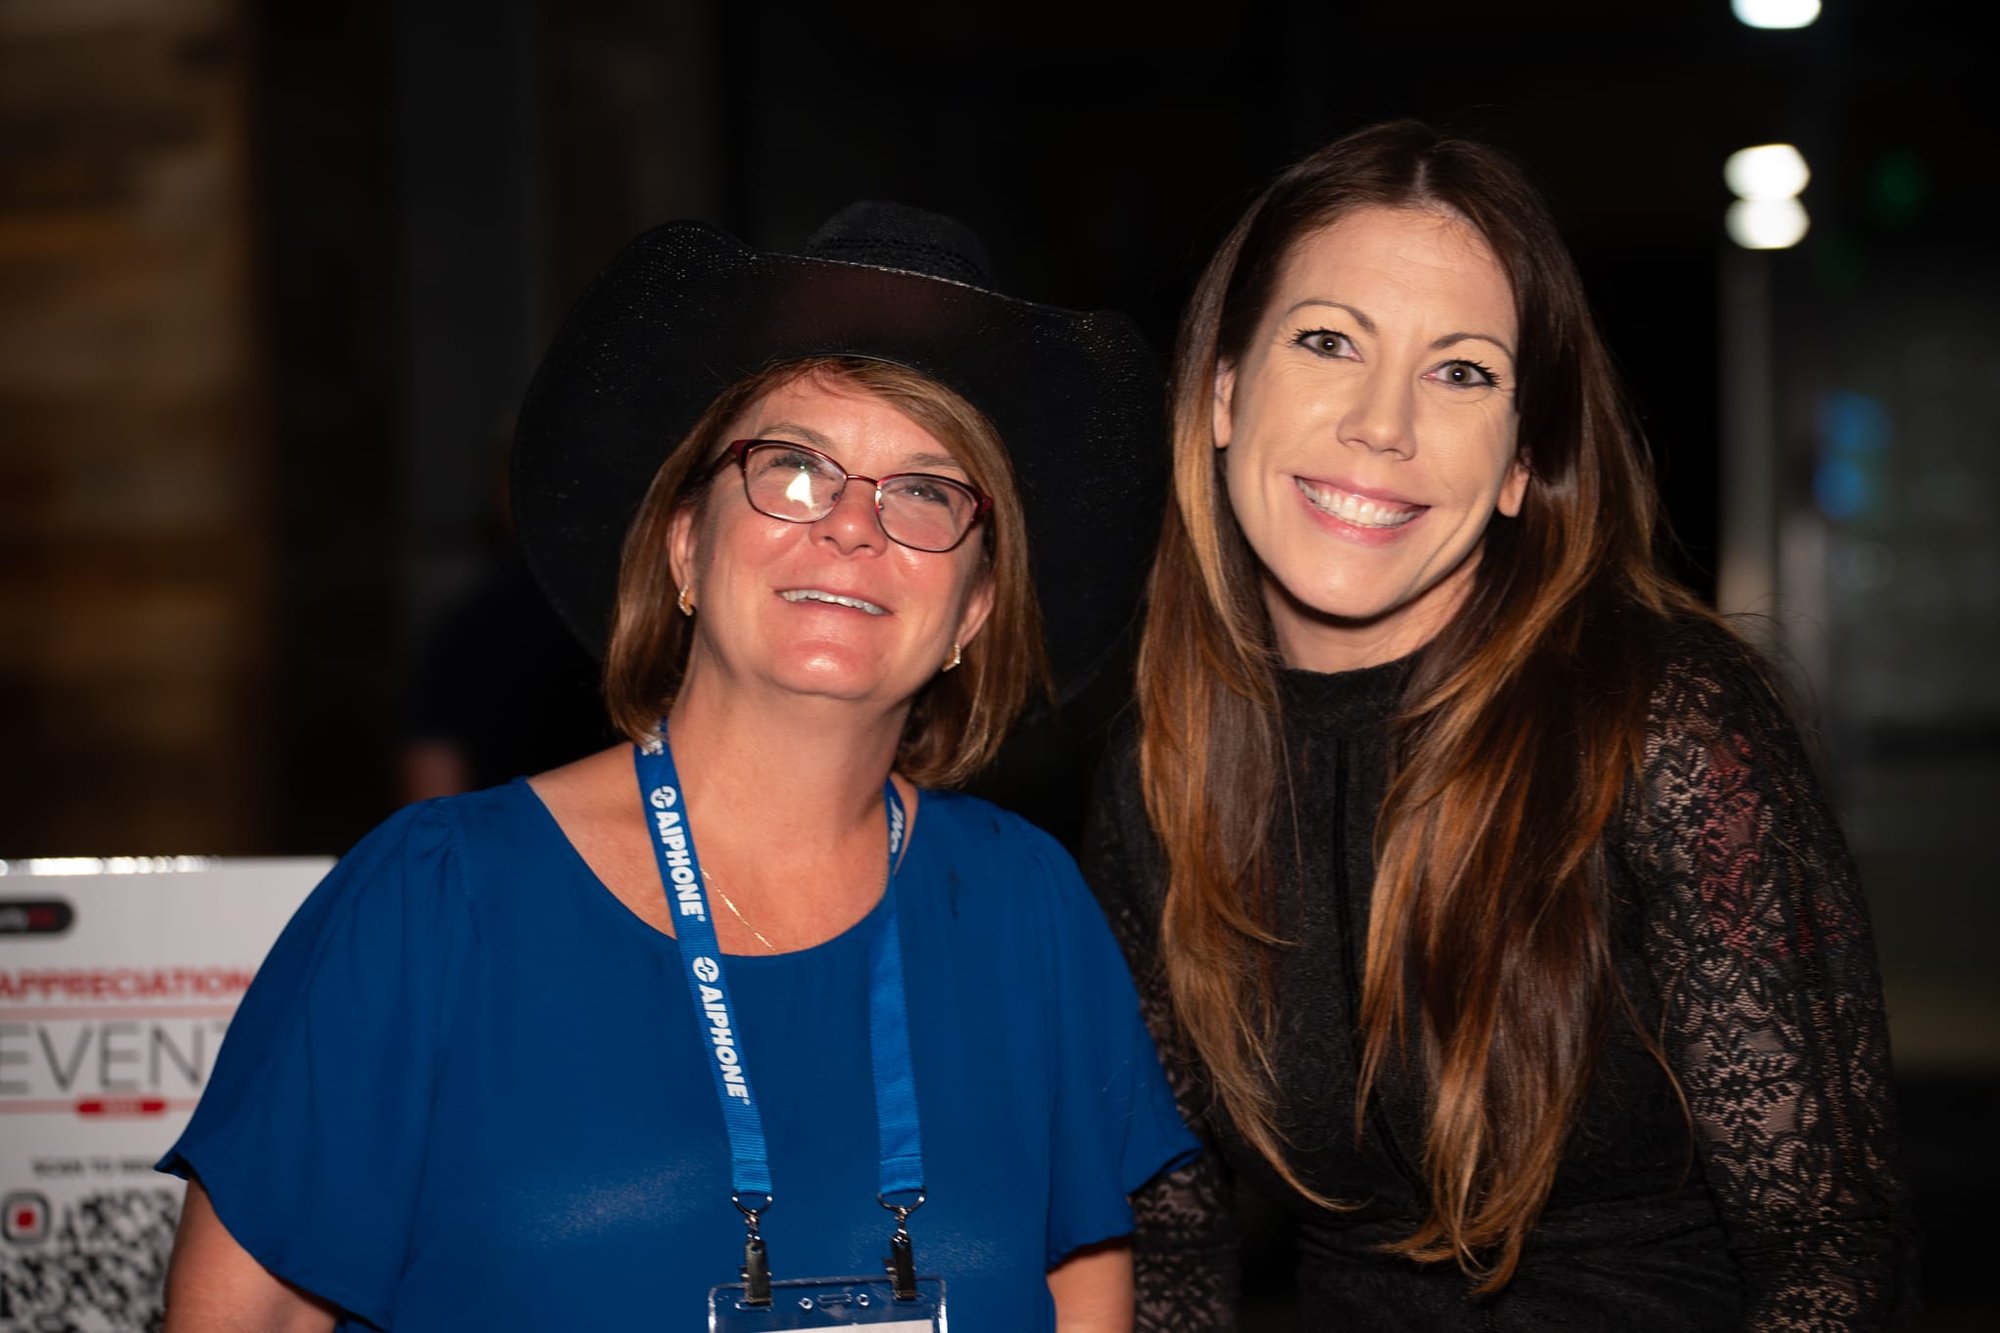 Candid shot of Stephanie Offutt and another attendee of Security 101 Appreciation Event at Happiest Hour in Dallas, TX